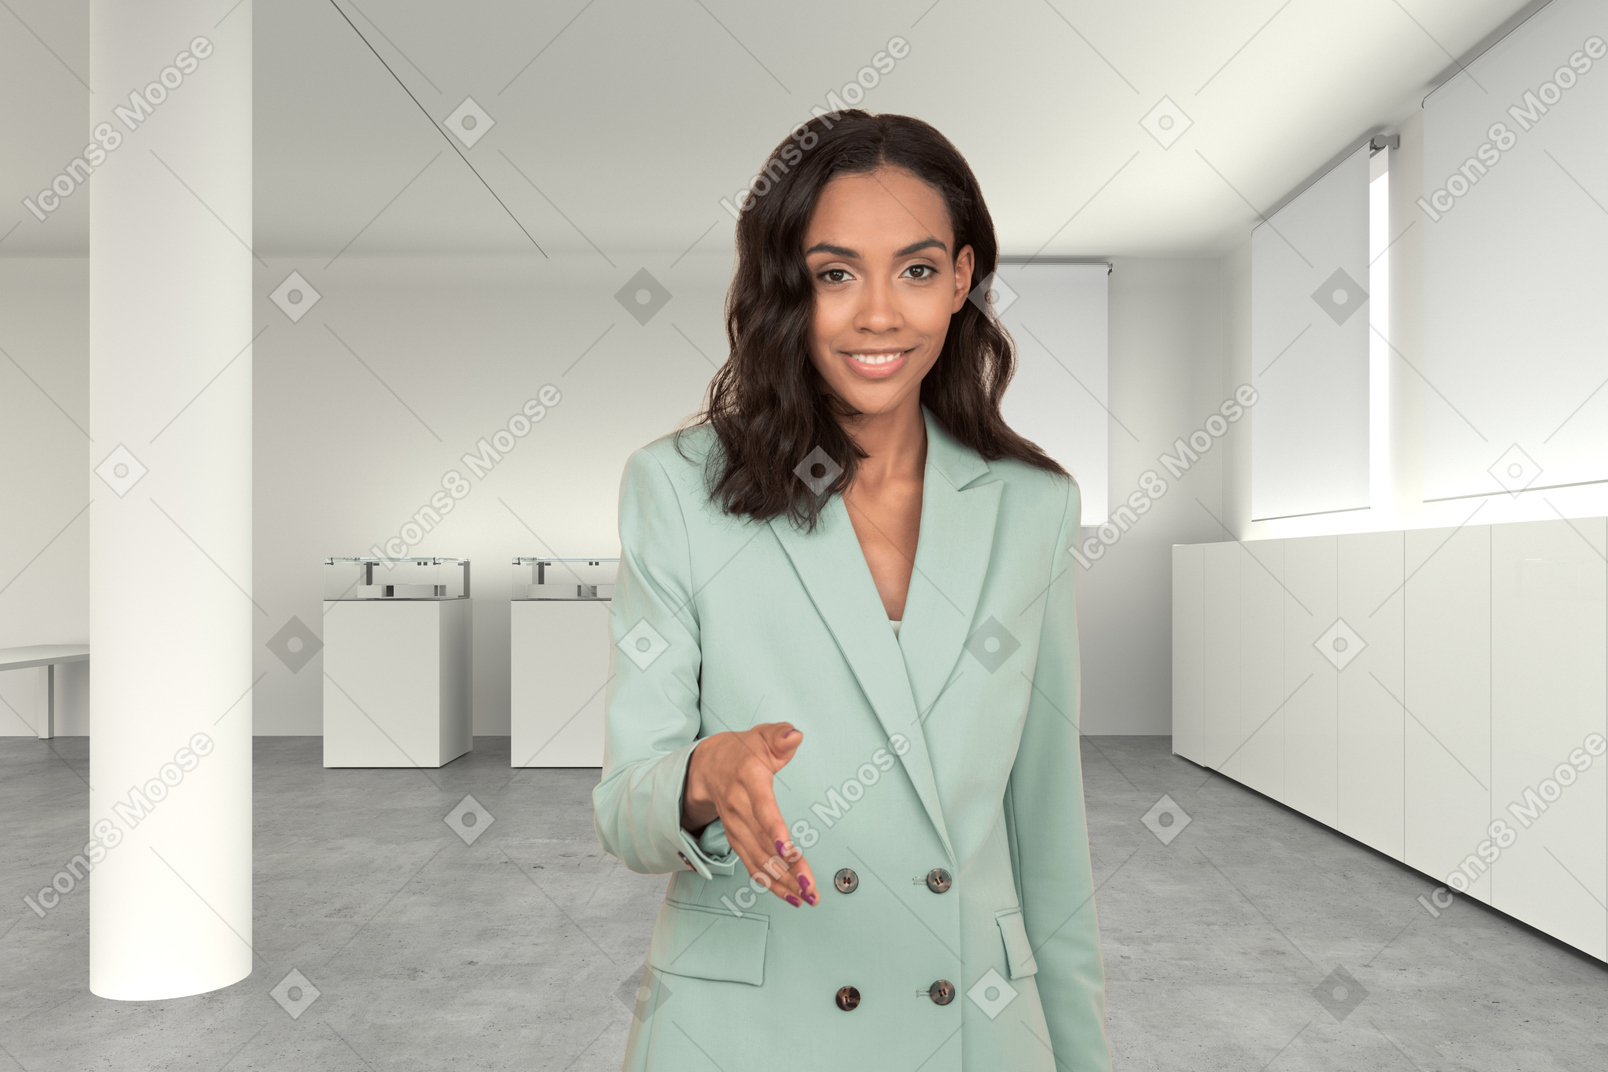 Young business woman holding out her hand for handshake